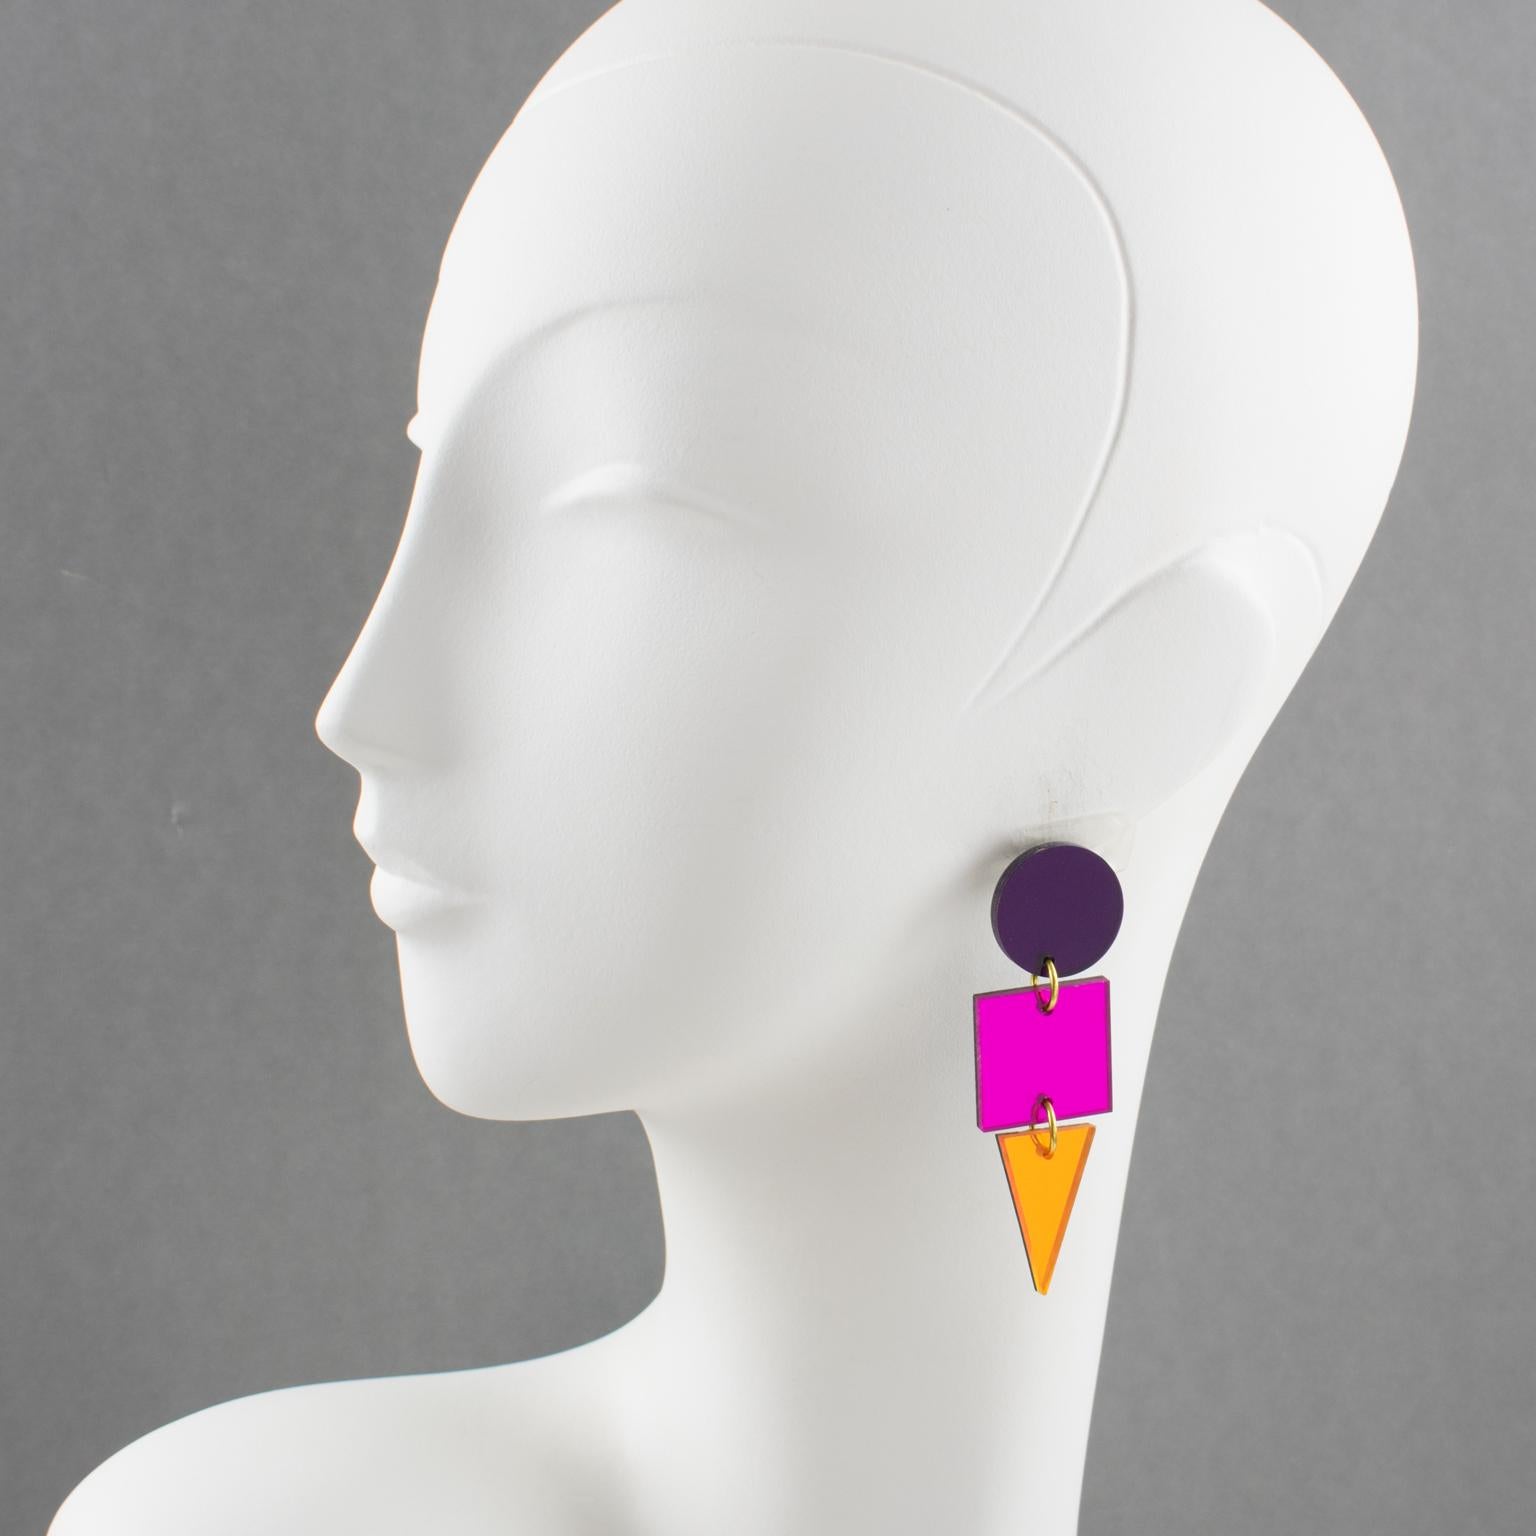 These beautiful Lucite pierced earrings boast a flat geometric shape with color-block colors and mirror-textured patterns in neon orange, hot pink, and purple tones. These pieces are for pierced ears. There is no visible maker's mark. 
Measurements: